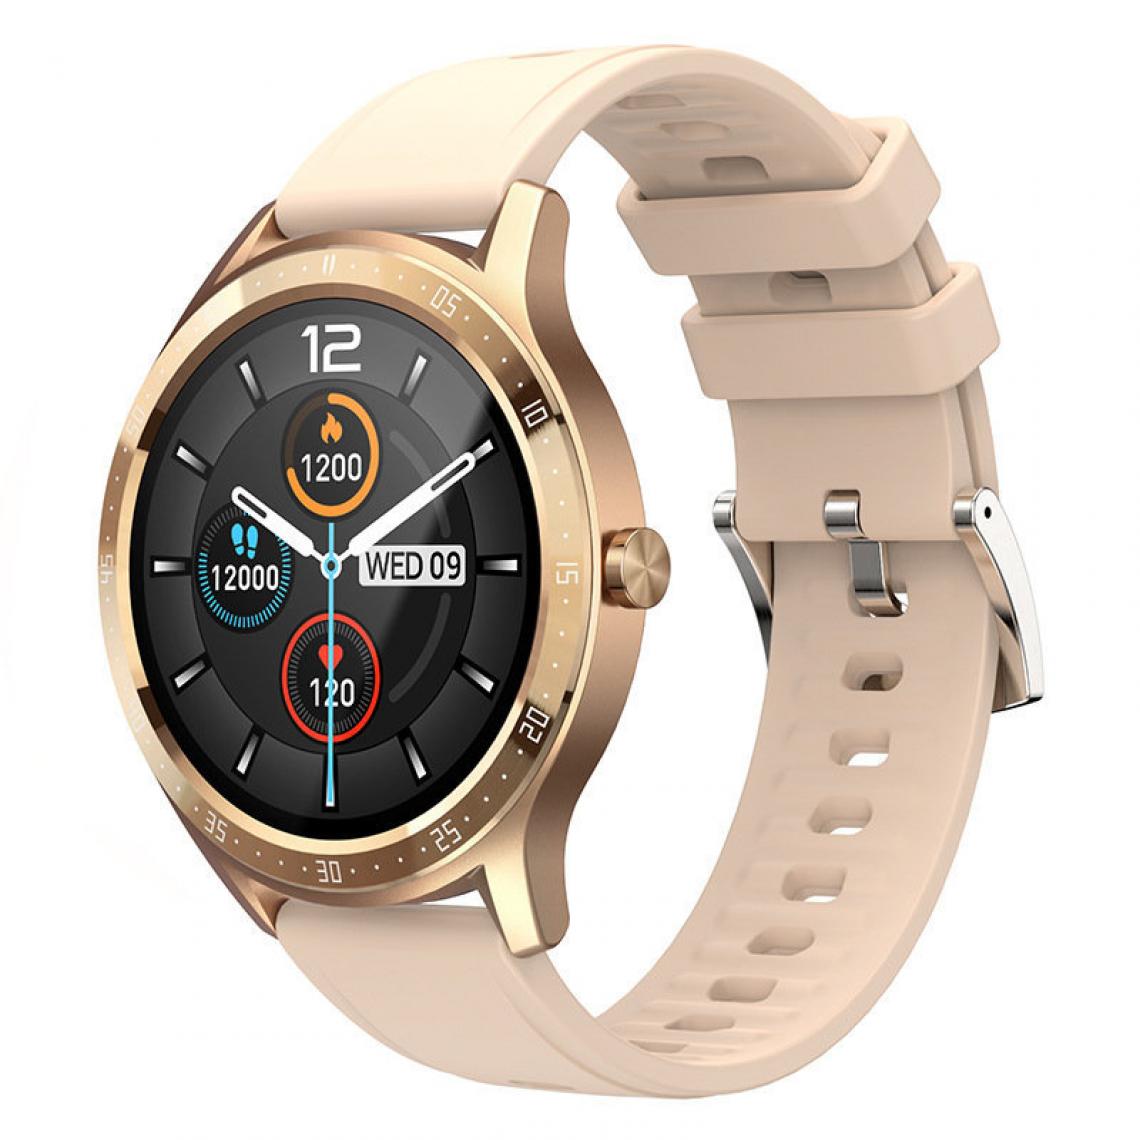 Chronotech Montres - Chronus Smart Watch for Men Women, 1.28 inch Touch Fitness Tracker with Heart Rate Monitor, Blood Pressure, Notification, IP67 Waterproof Fitness Watch with 8 Mode Sports, Round Smartwatch for Android iOS(gold) - Montre connectée